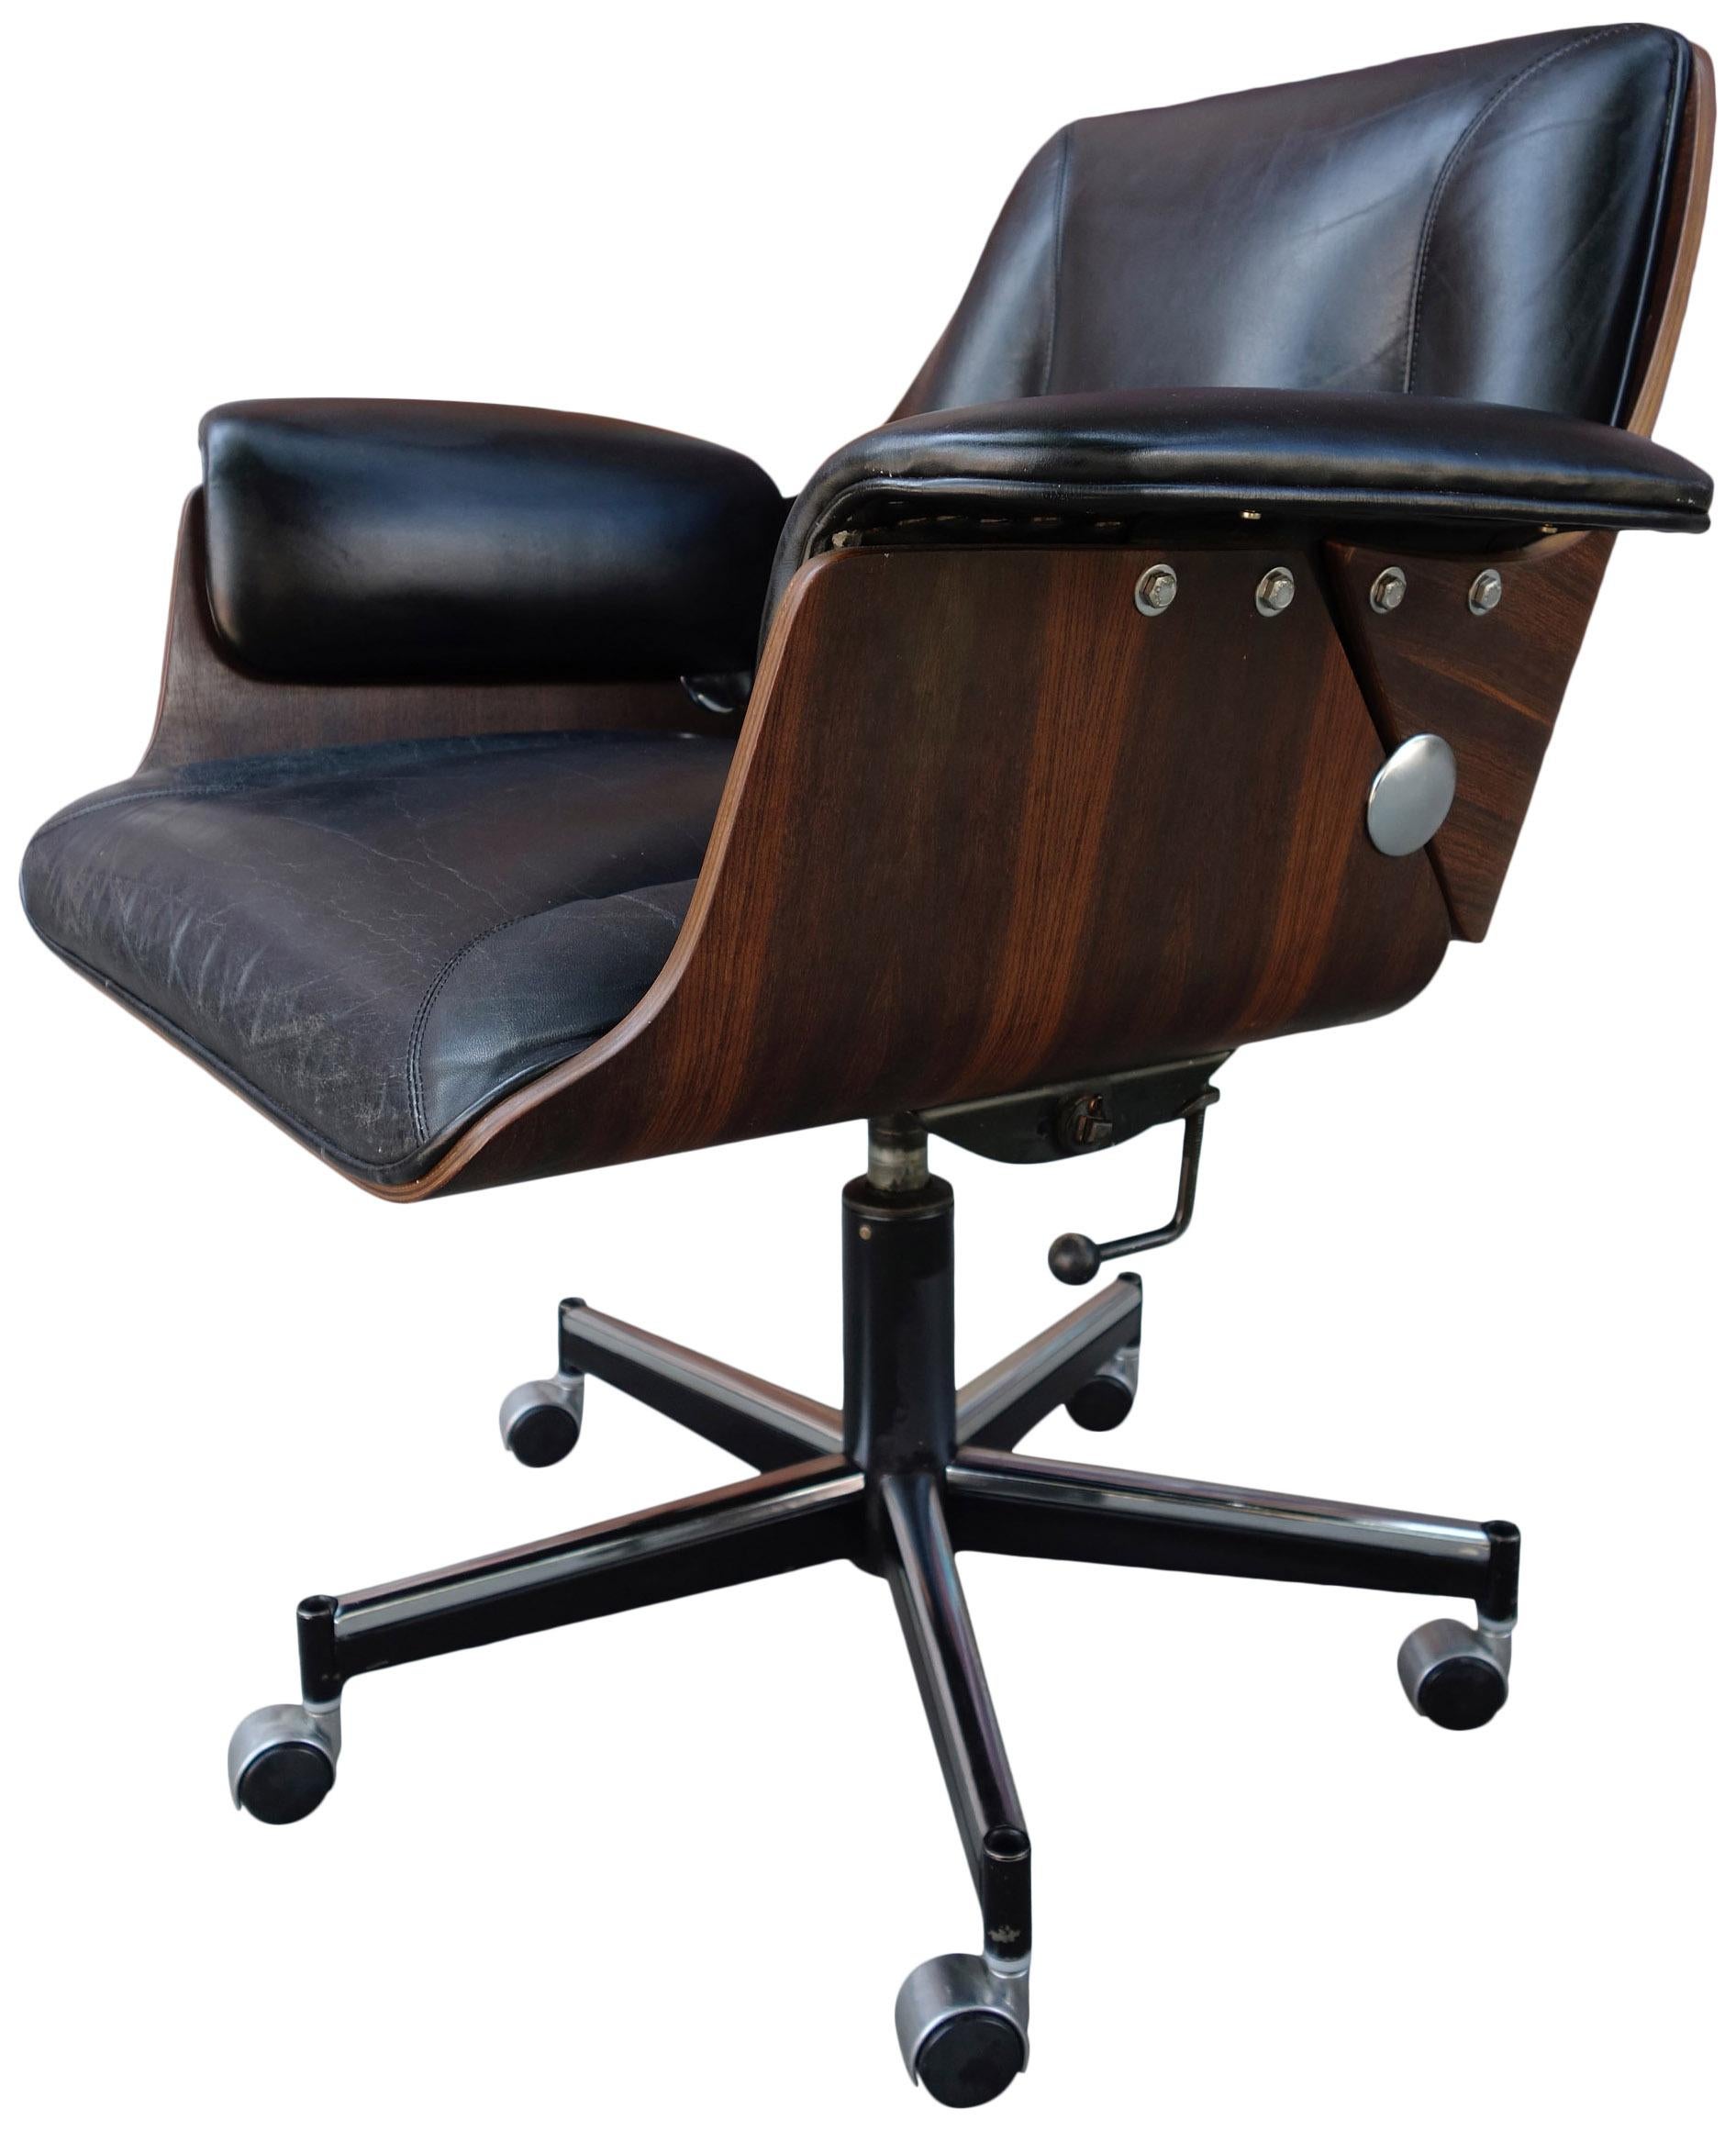 For your consideration is this exceptional designed Probjeto executive office chair by Carlo Fongaro manufactured by Dinamarquesa, Brazil. All original leather in great vintage condition. With height, tilt, and swivel adjustments. Featuring a bent